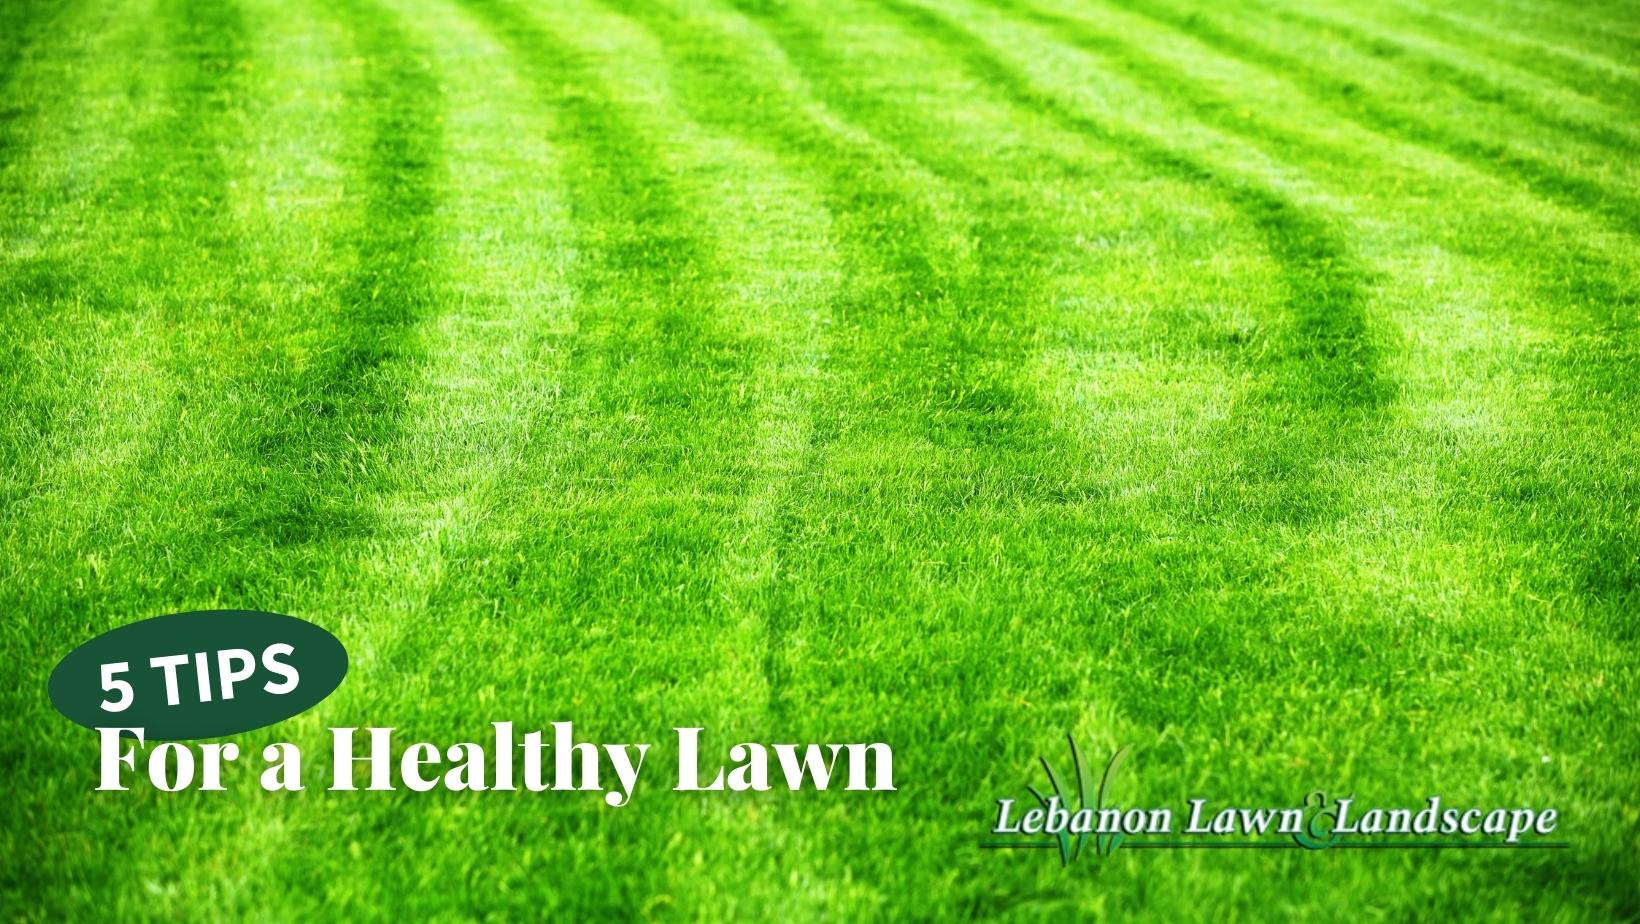 Lawn with mowing lines